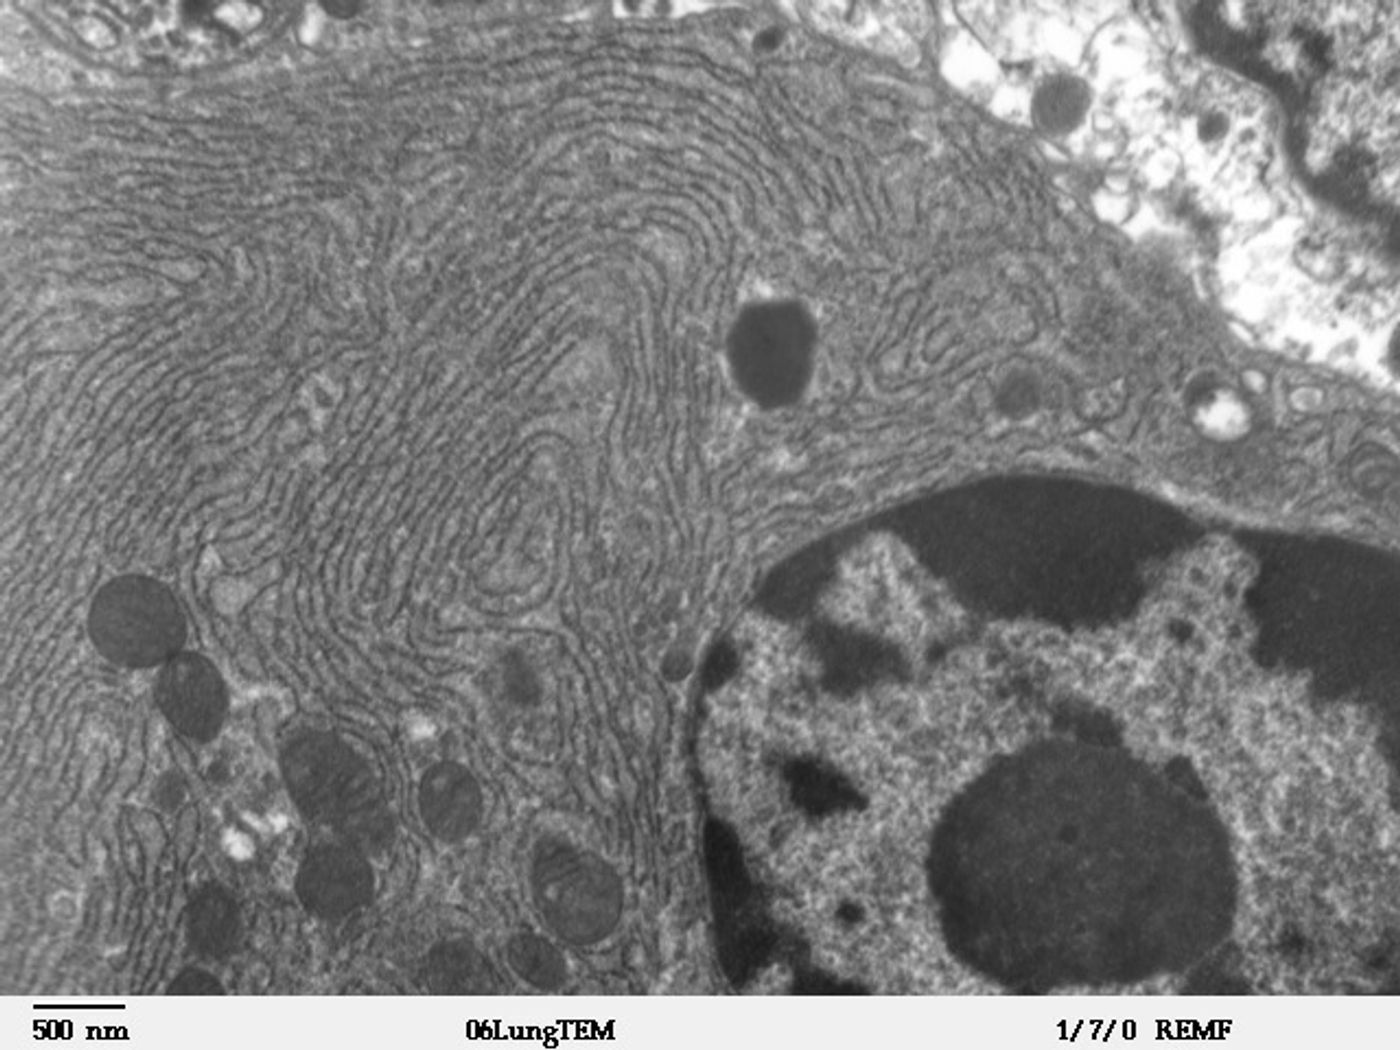 Micrograph of rough endoplasmic reticulum network around the nucleus (shown in lower right-hand side of the picture). Dark small circles in the network are mitochondria. / Credit: Louisa Howard, Dartmouth